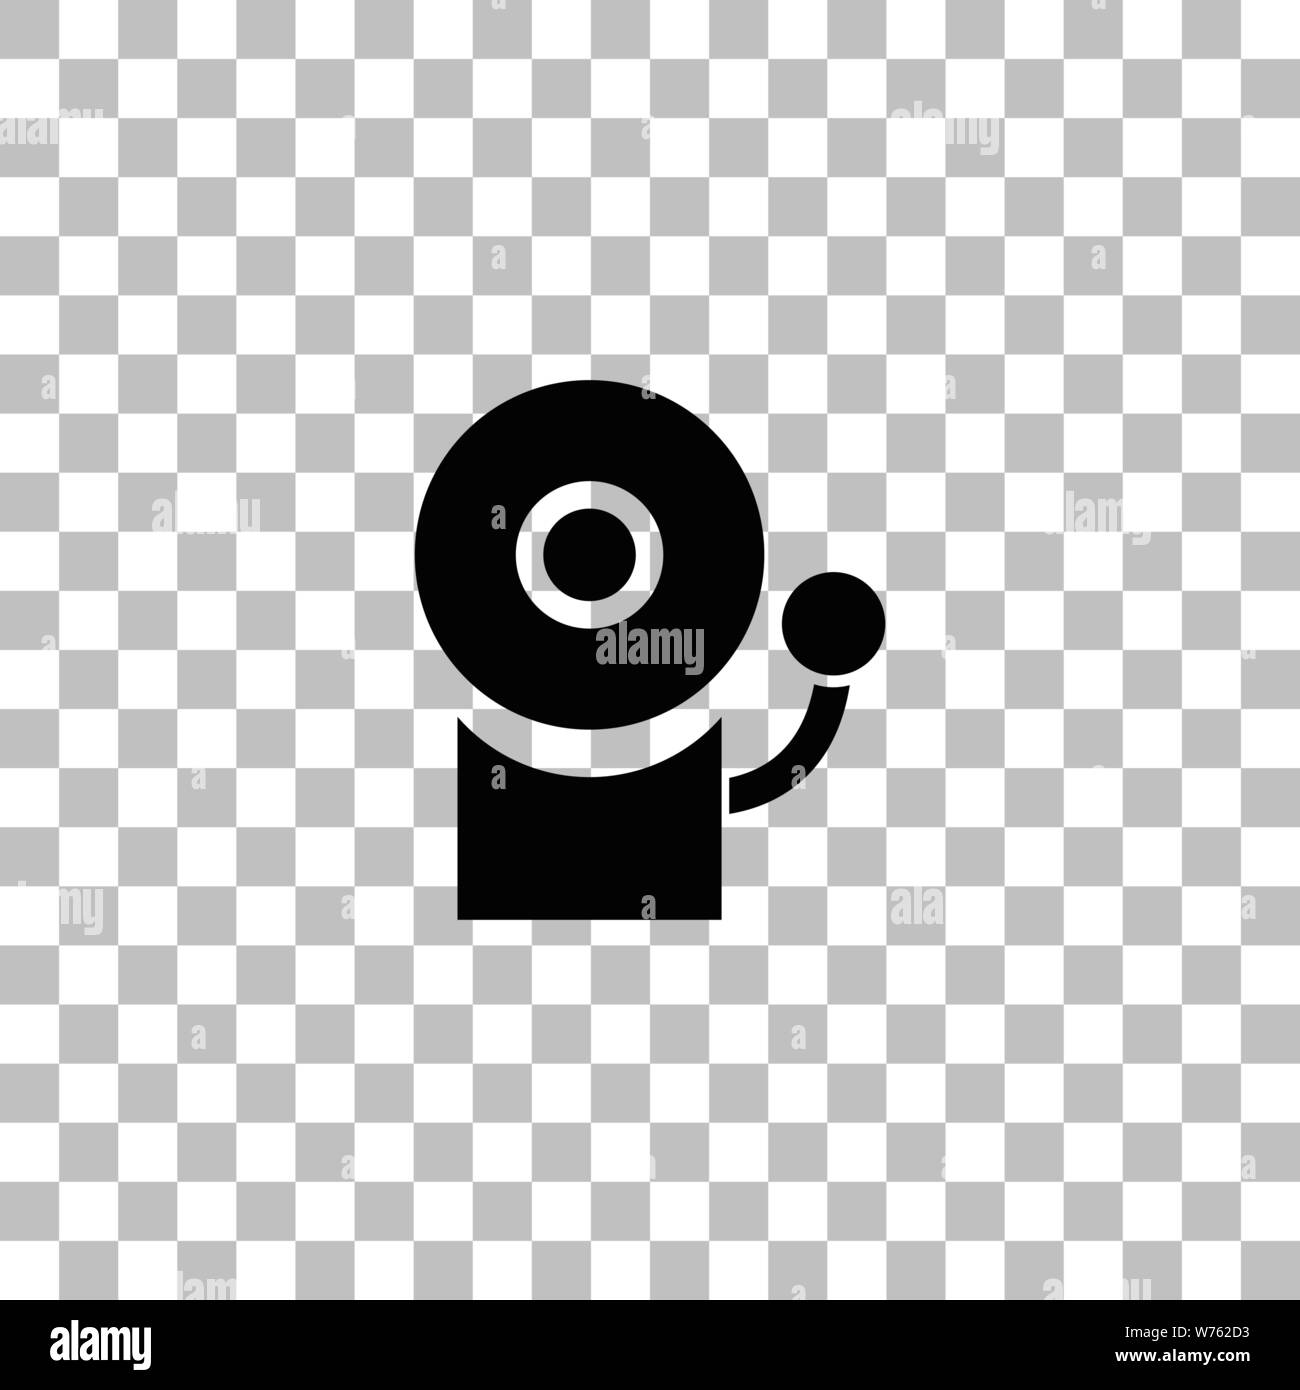 Fire alarm. Black flat icon on a transparent background. Pictogram for your project Stock Vector